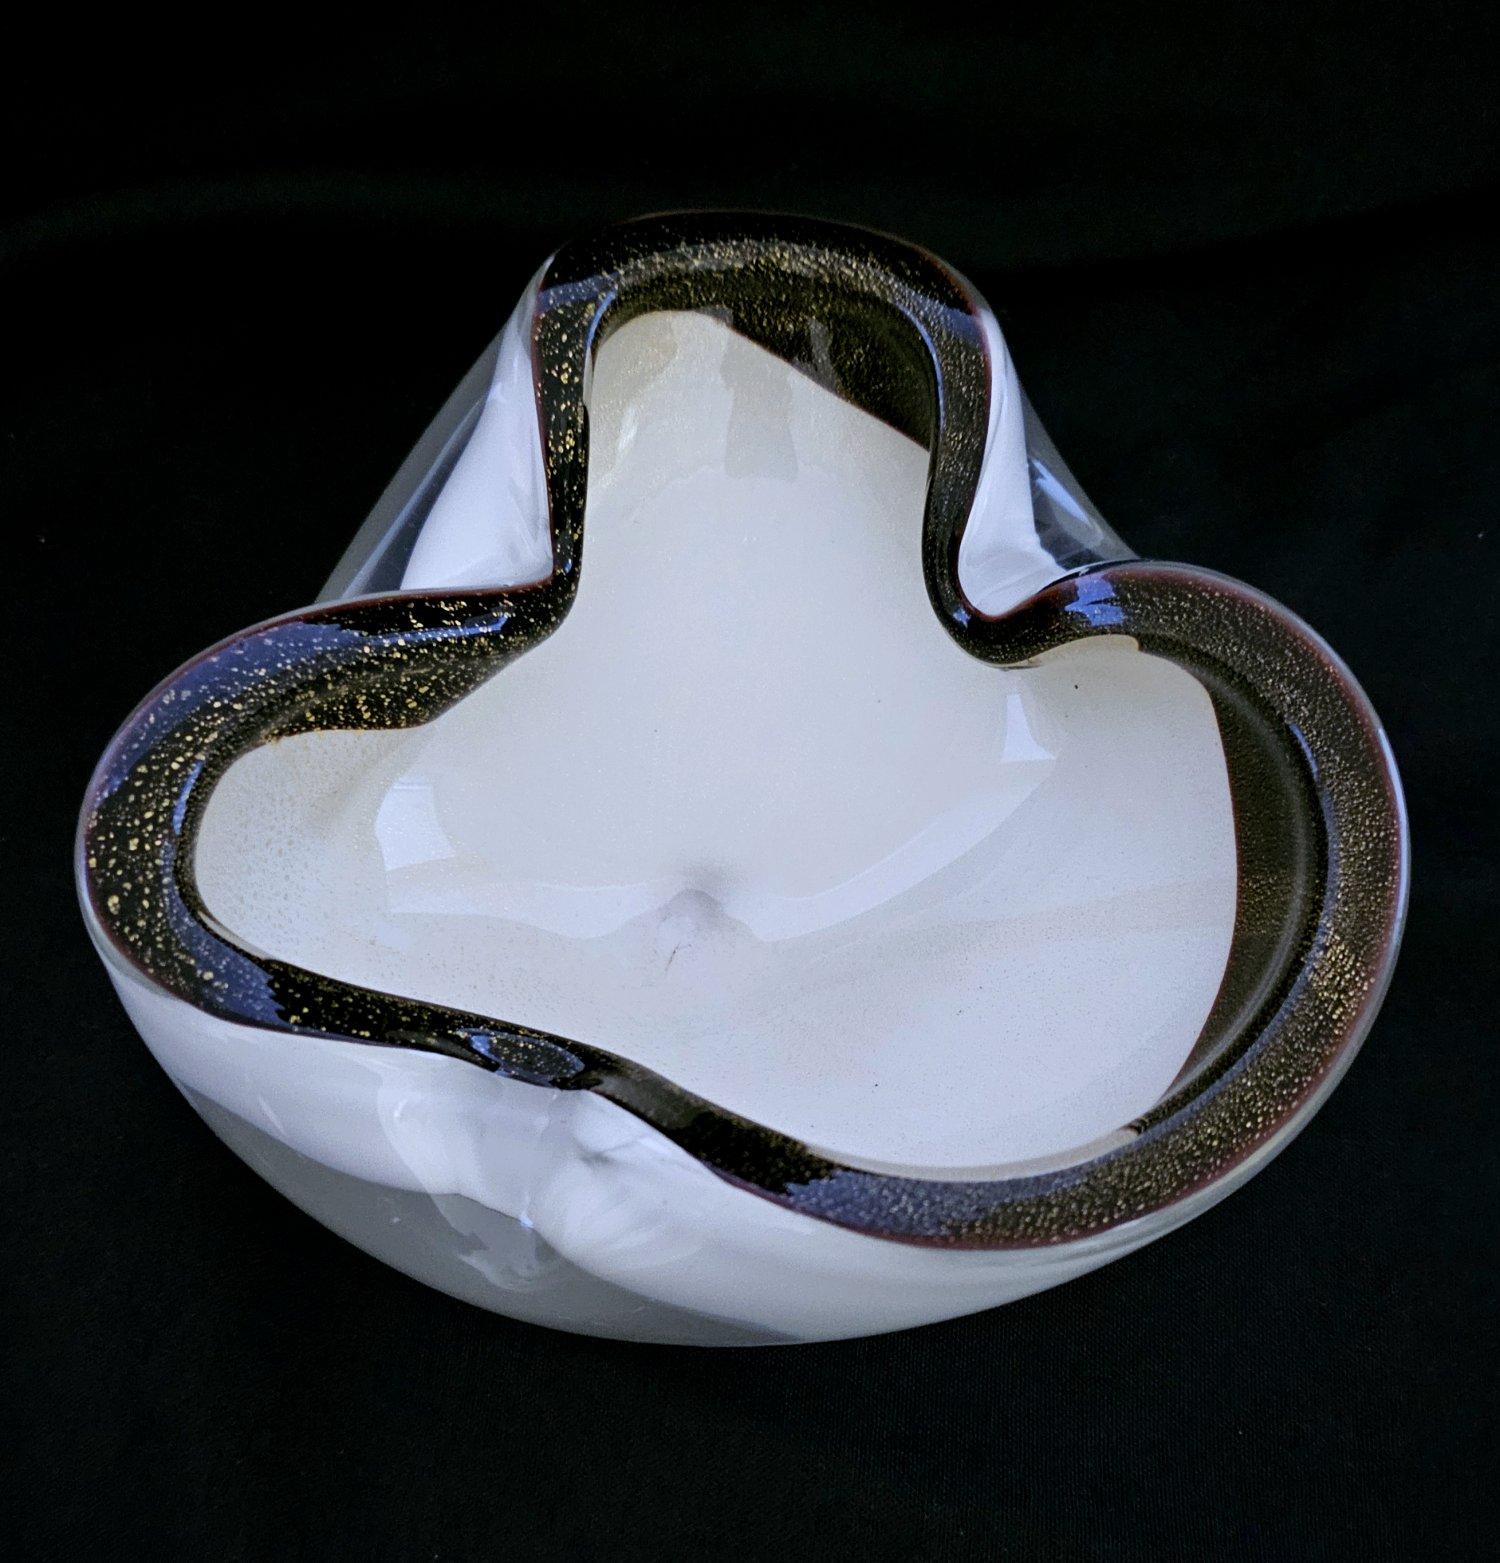 Alfredo Barbini Murano Glass Bowl with Gold Polveri / Gold Leaf - vintage .
The colored areas contain gold polveri/gold leaf. There are also subtler dustings and swirls of gold polveri in the white interior.
Colors: White, brown w/appearance of dark